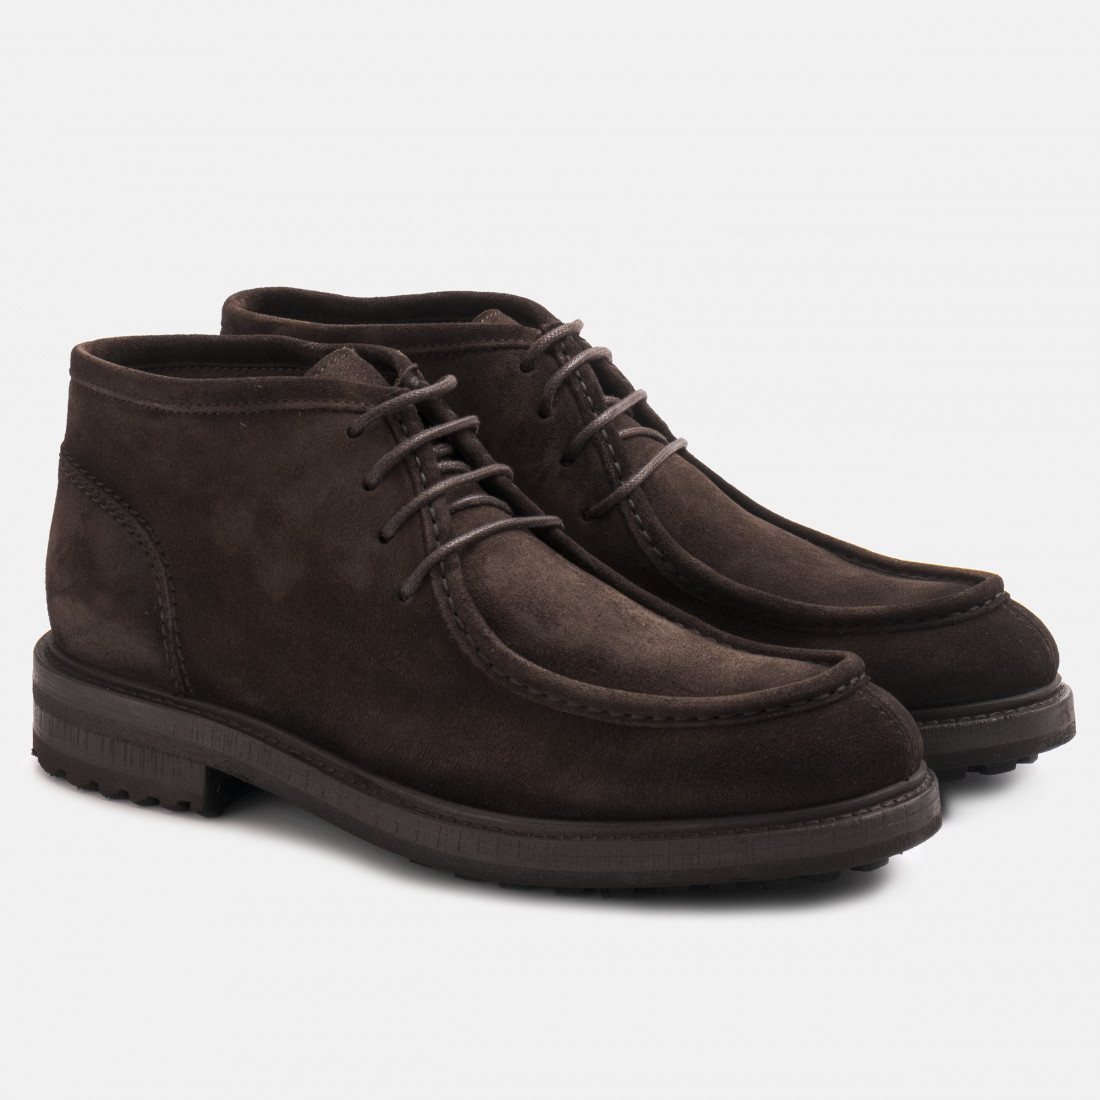 Jerold Wilton men's lace up ankle boot in ebony suede